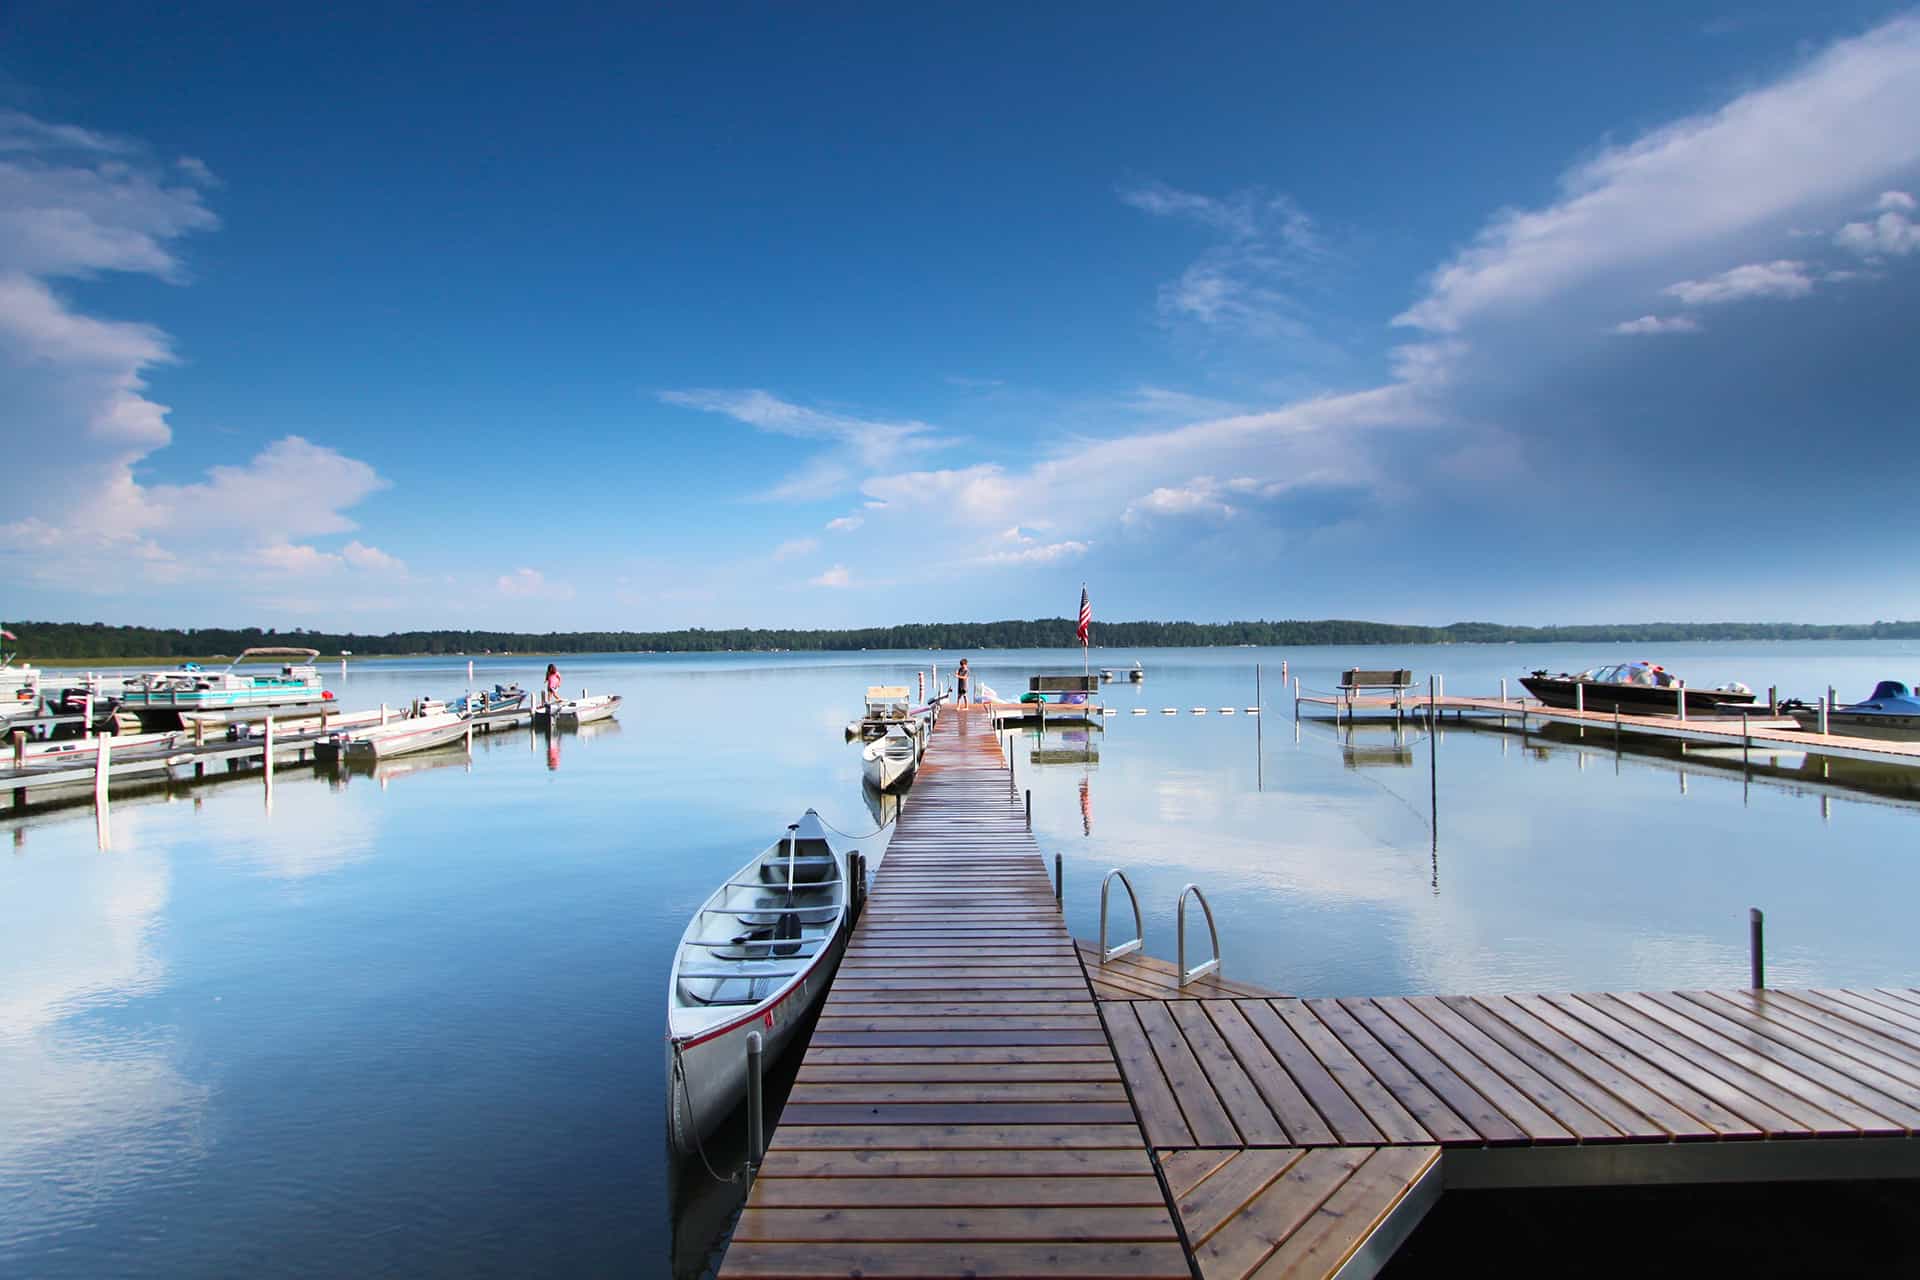 1920x1280 Photo from Eagles Nest Resort of a dock in a lake surrounded by boats on a bright summer day